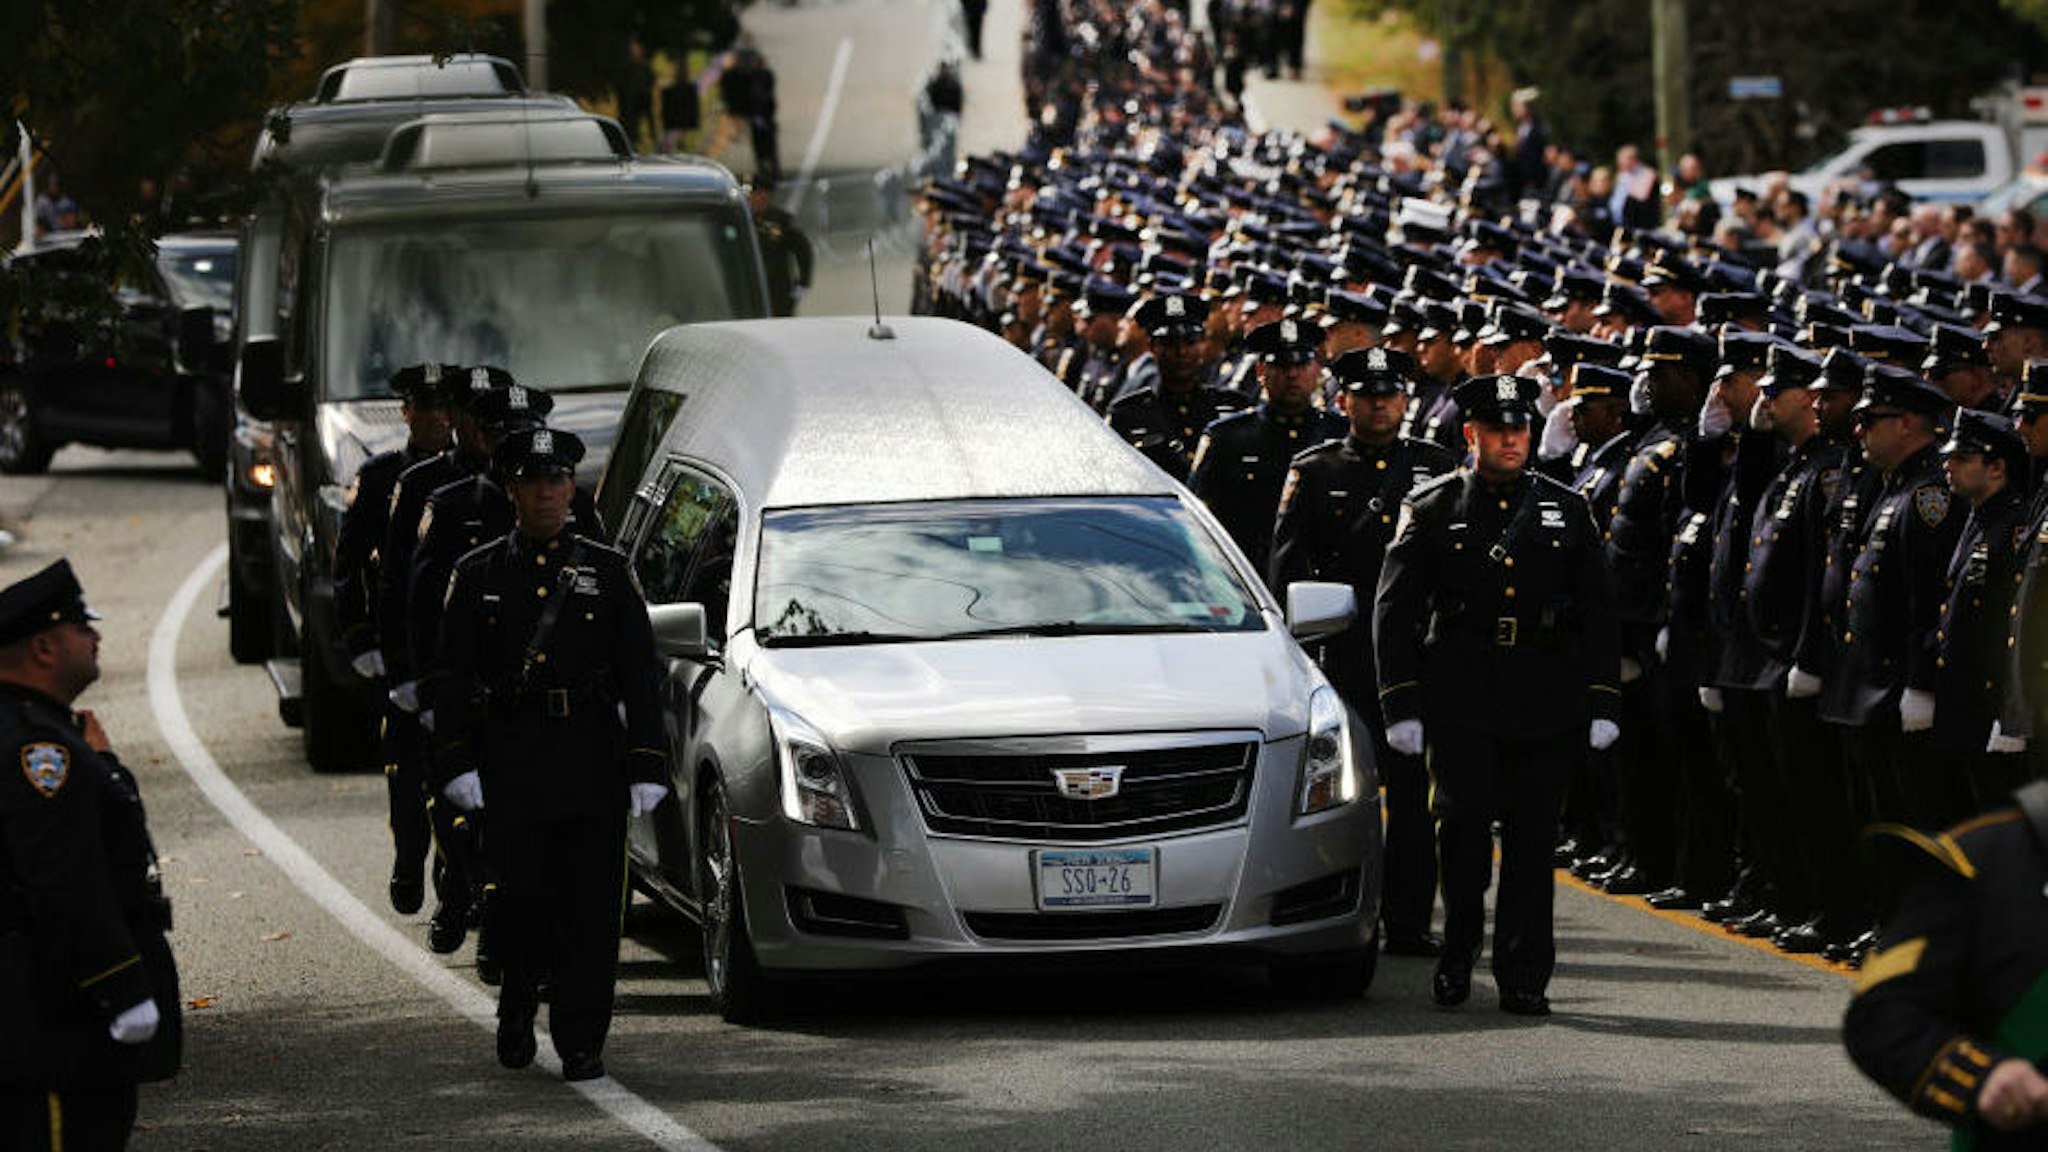 MONROE, NEW YORK - OCTOBER 04: The funeral procession of fallen NYPD Officer Brian Mulkeen departs the Church of the Sacred Heart on October 04, 2019 in Monroe, New York. Officer Mulkeen had been on the force for seven years and was killed while wrestling with an armed man during a confrontation in the Bronx. The shooting has been called a friendly fire incident.